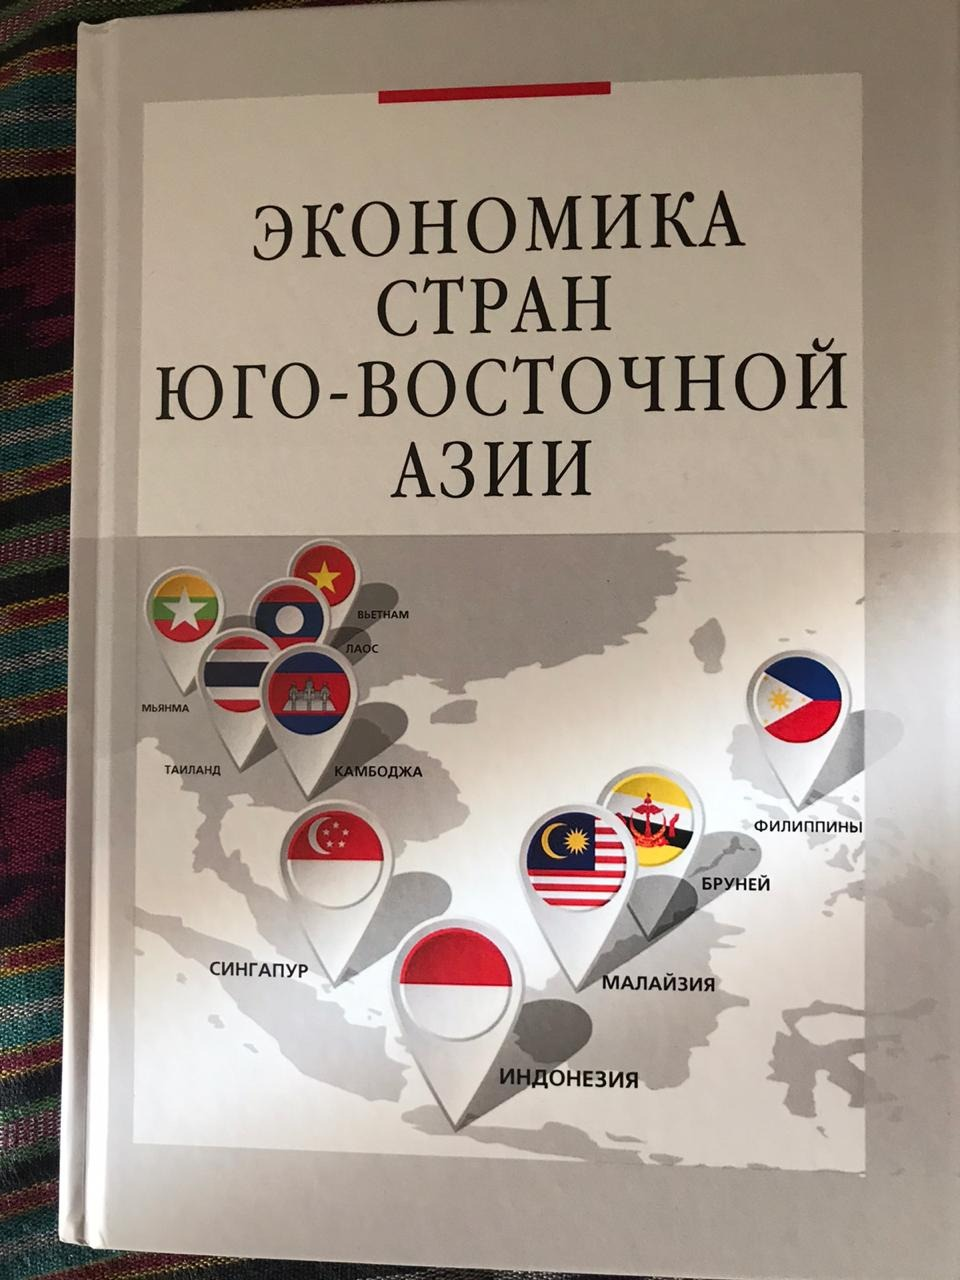 Introducing the new textbook The Economy of South East Asian countries